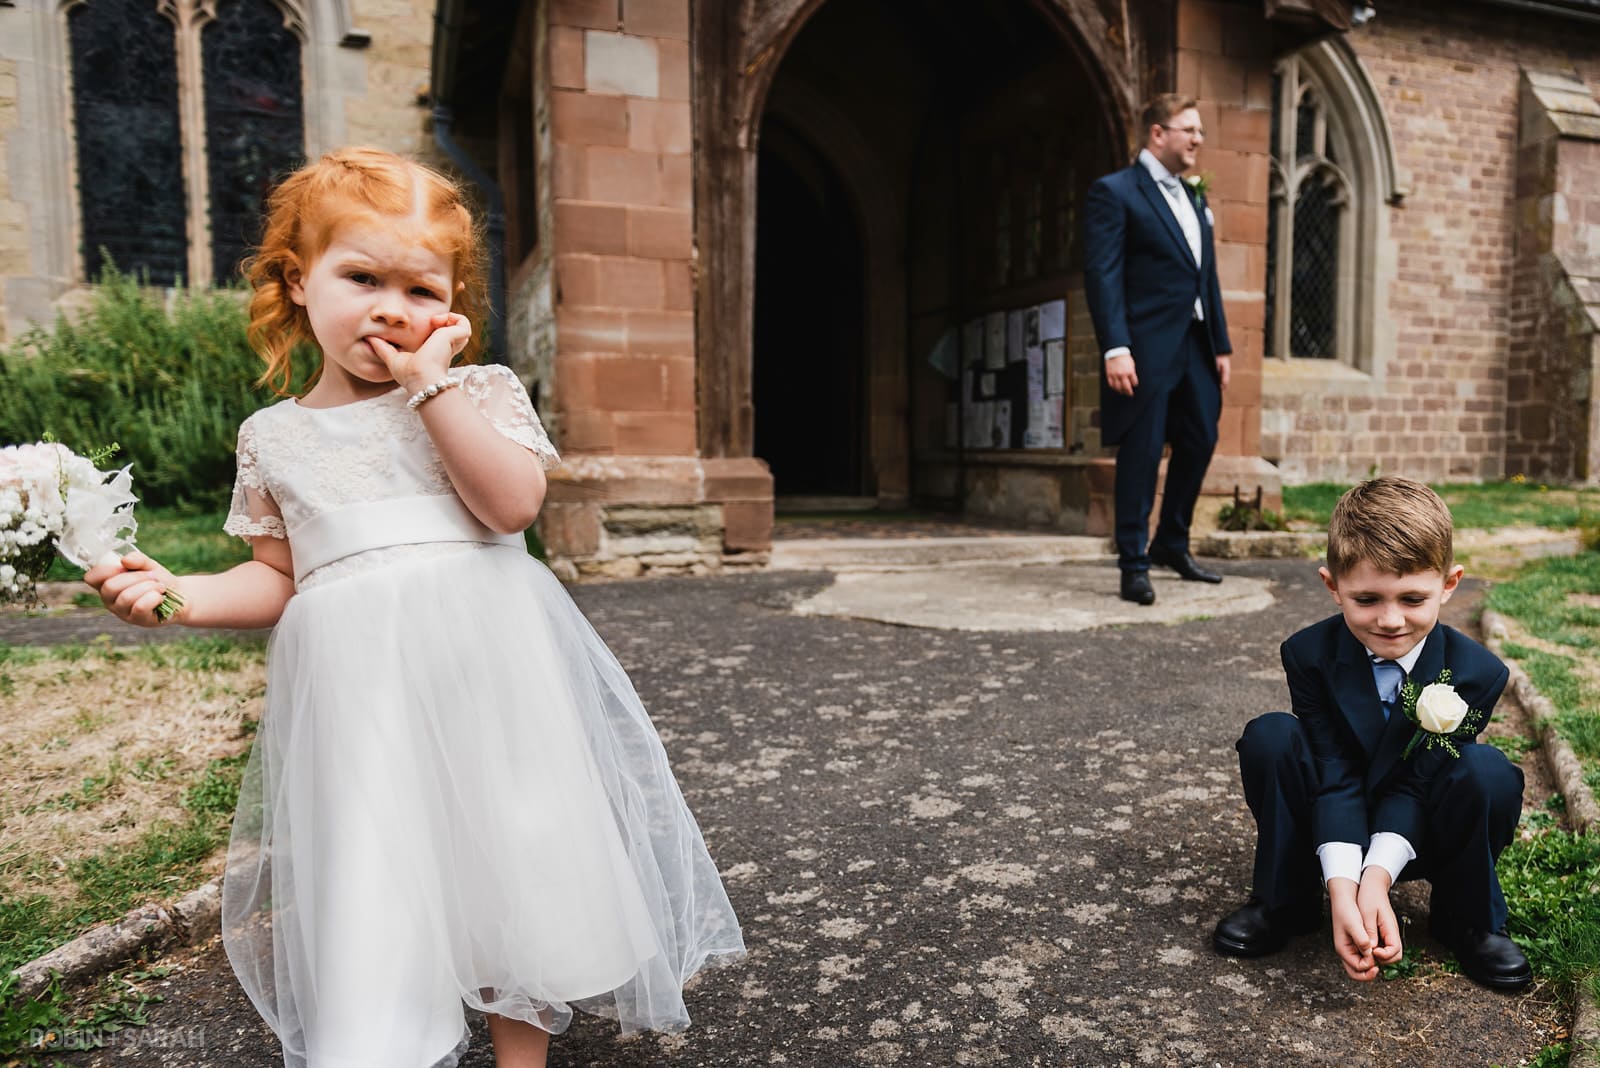 Young kids arrive at church for wedding